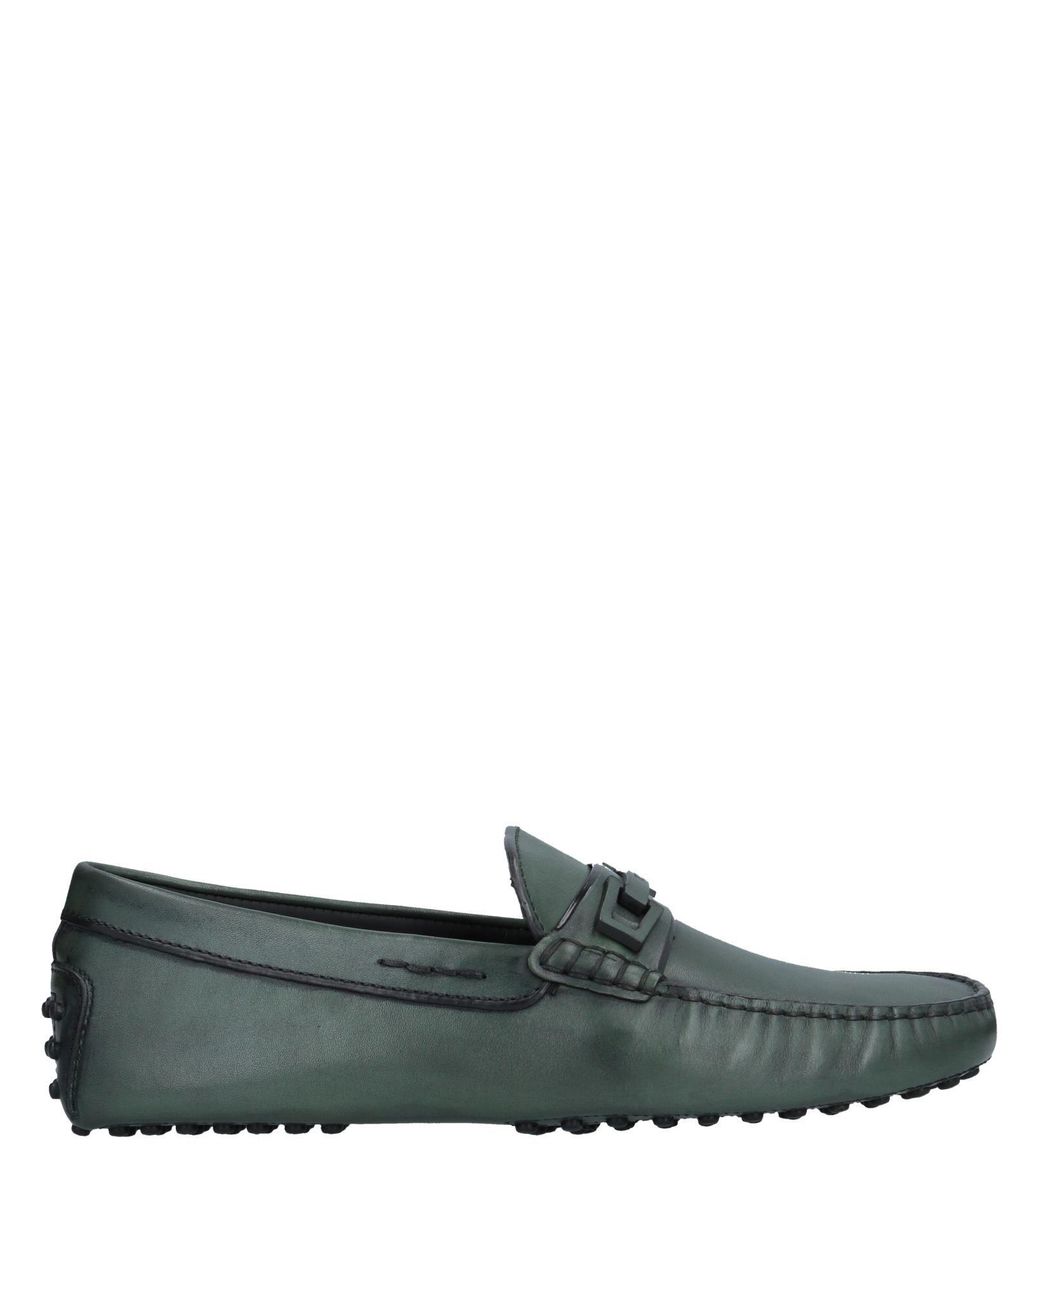 Tod's Leather Loafer in Green for Men - Lyst